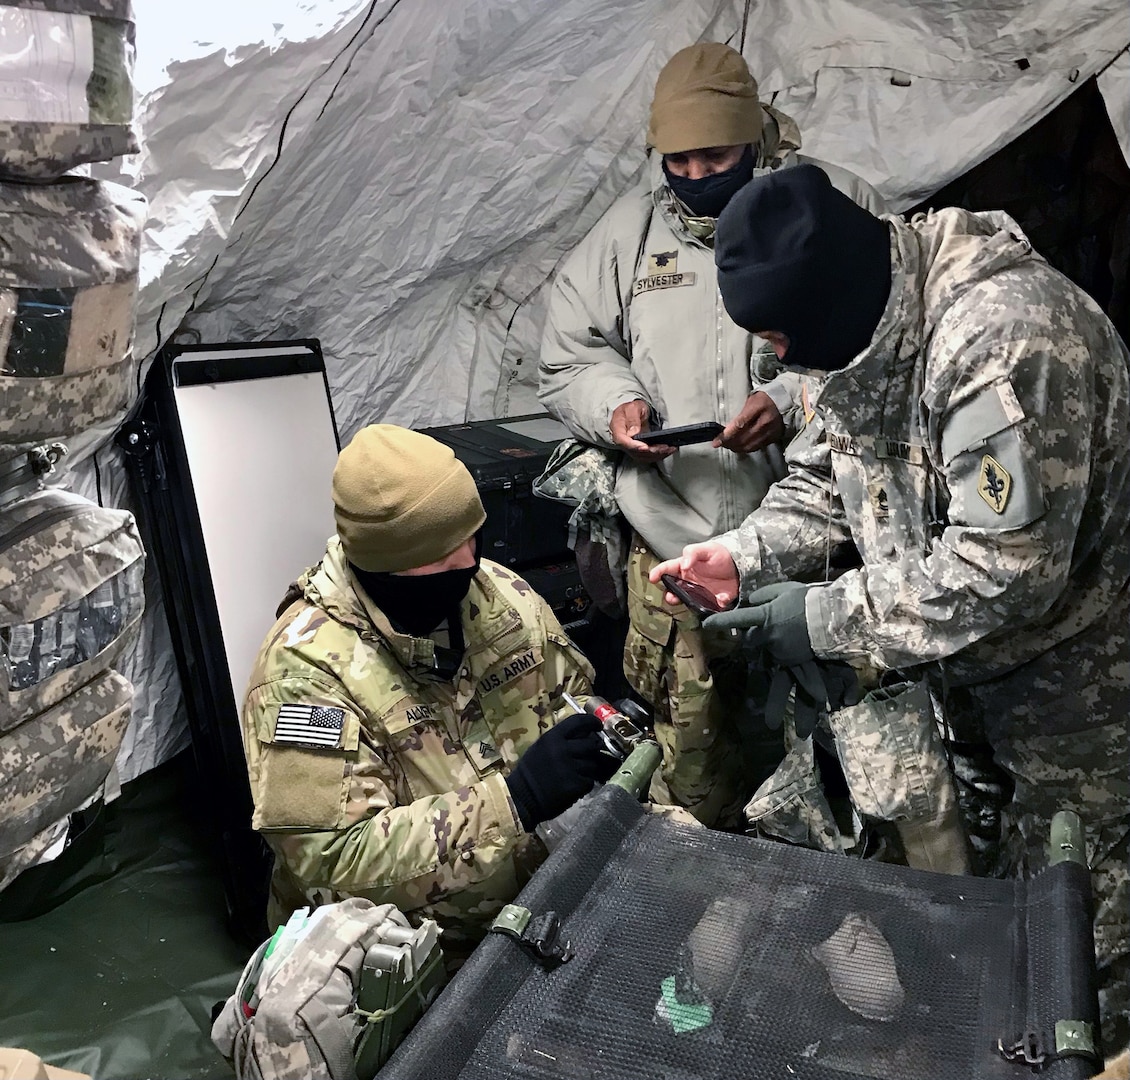 (From left): A medic from 4th Brigade 25th Infantry Division; Lt. Col. Cleve Sylvester; and Master Sgt. David Edwards assessing CLVIII at Role 1 in support of Arctic Warrior 2021 at Fort Greely, Alaska.